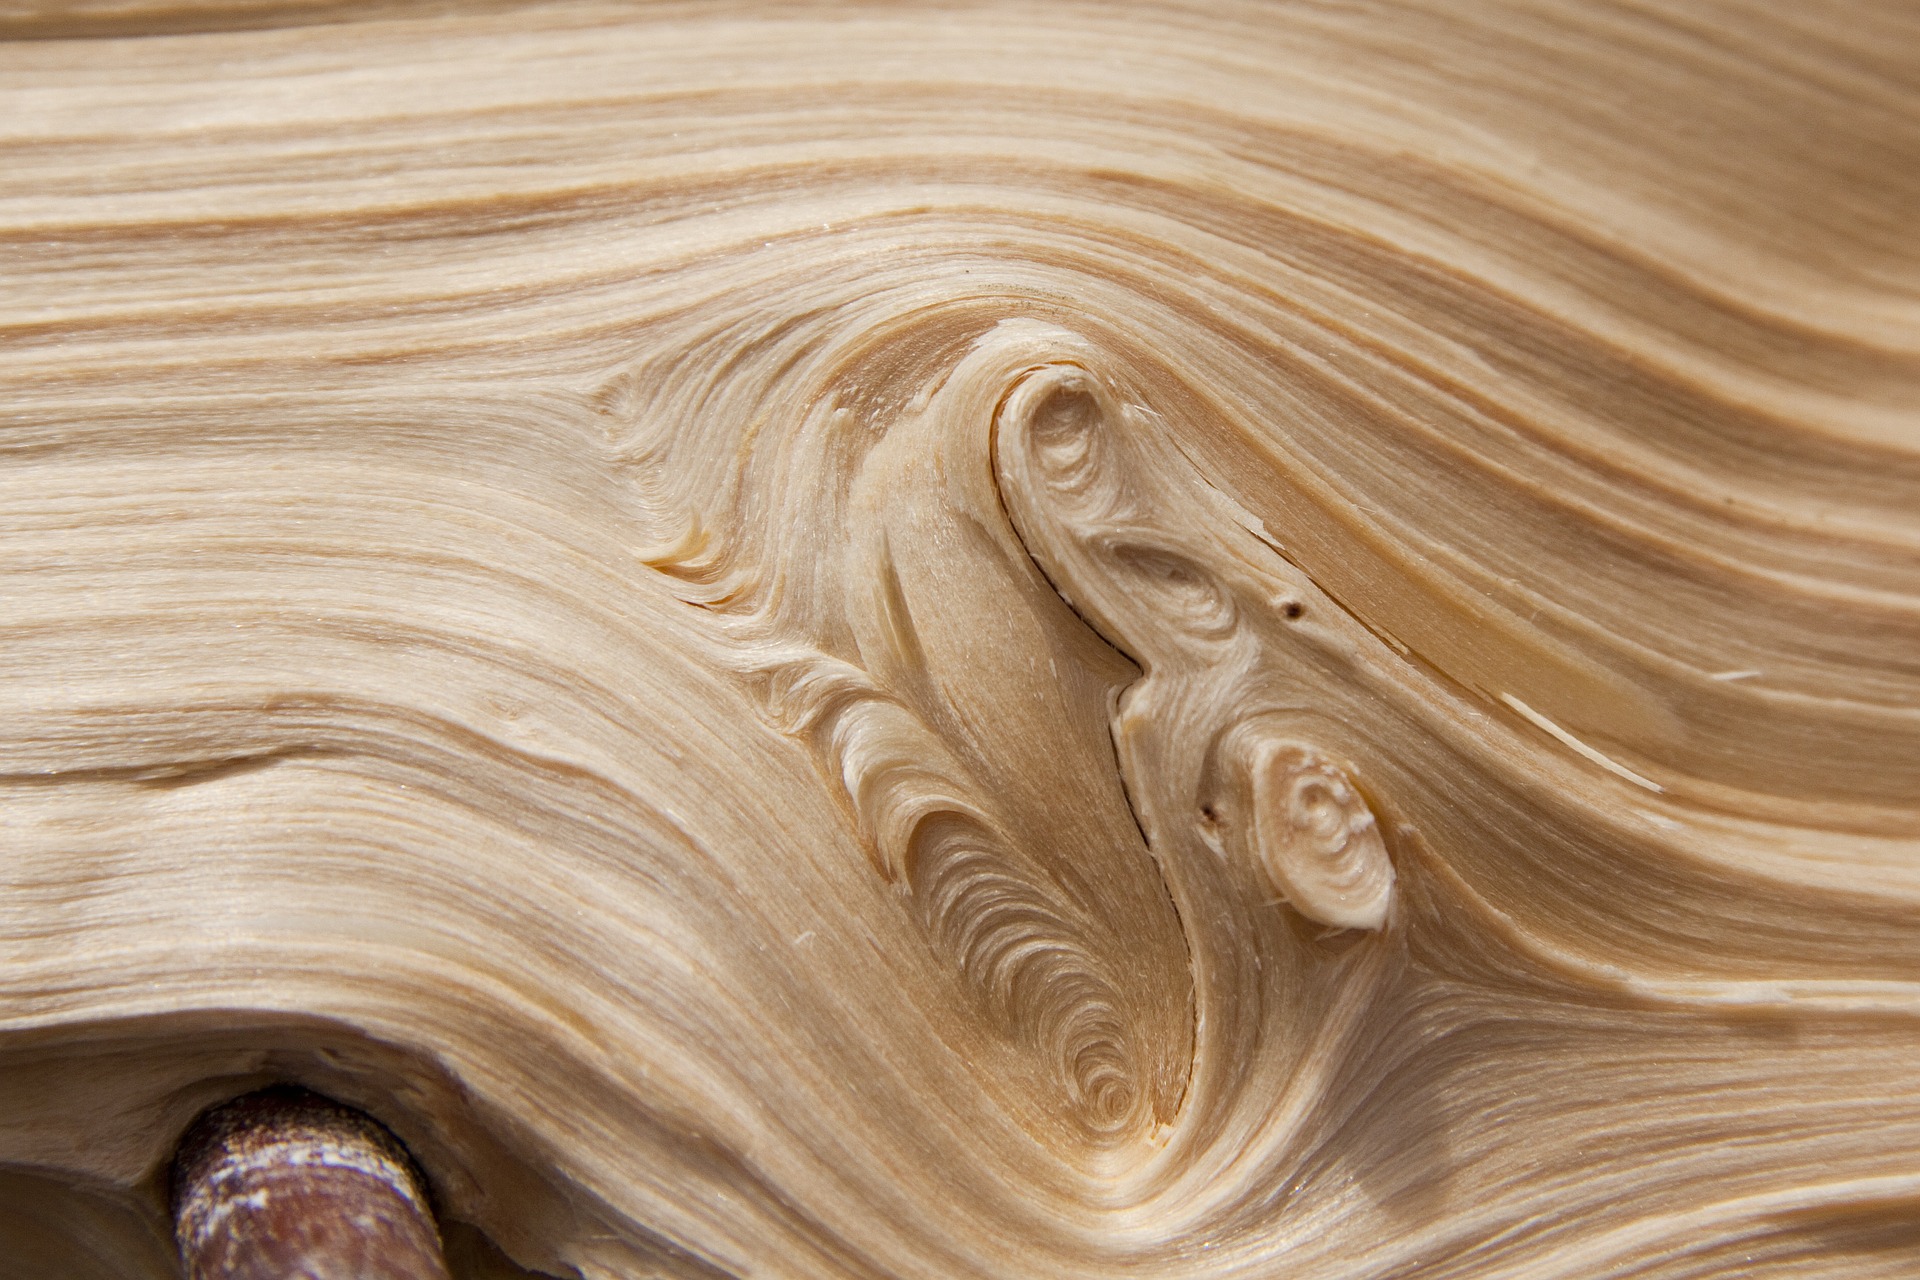 Wood Grain Texture, Abstract, Flow, Grain, Knotted, HQ Photo